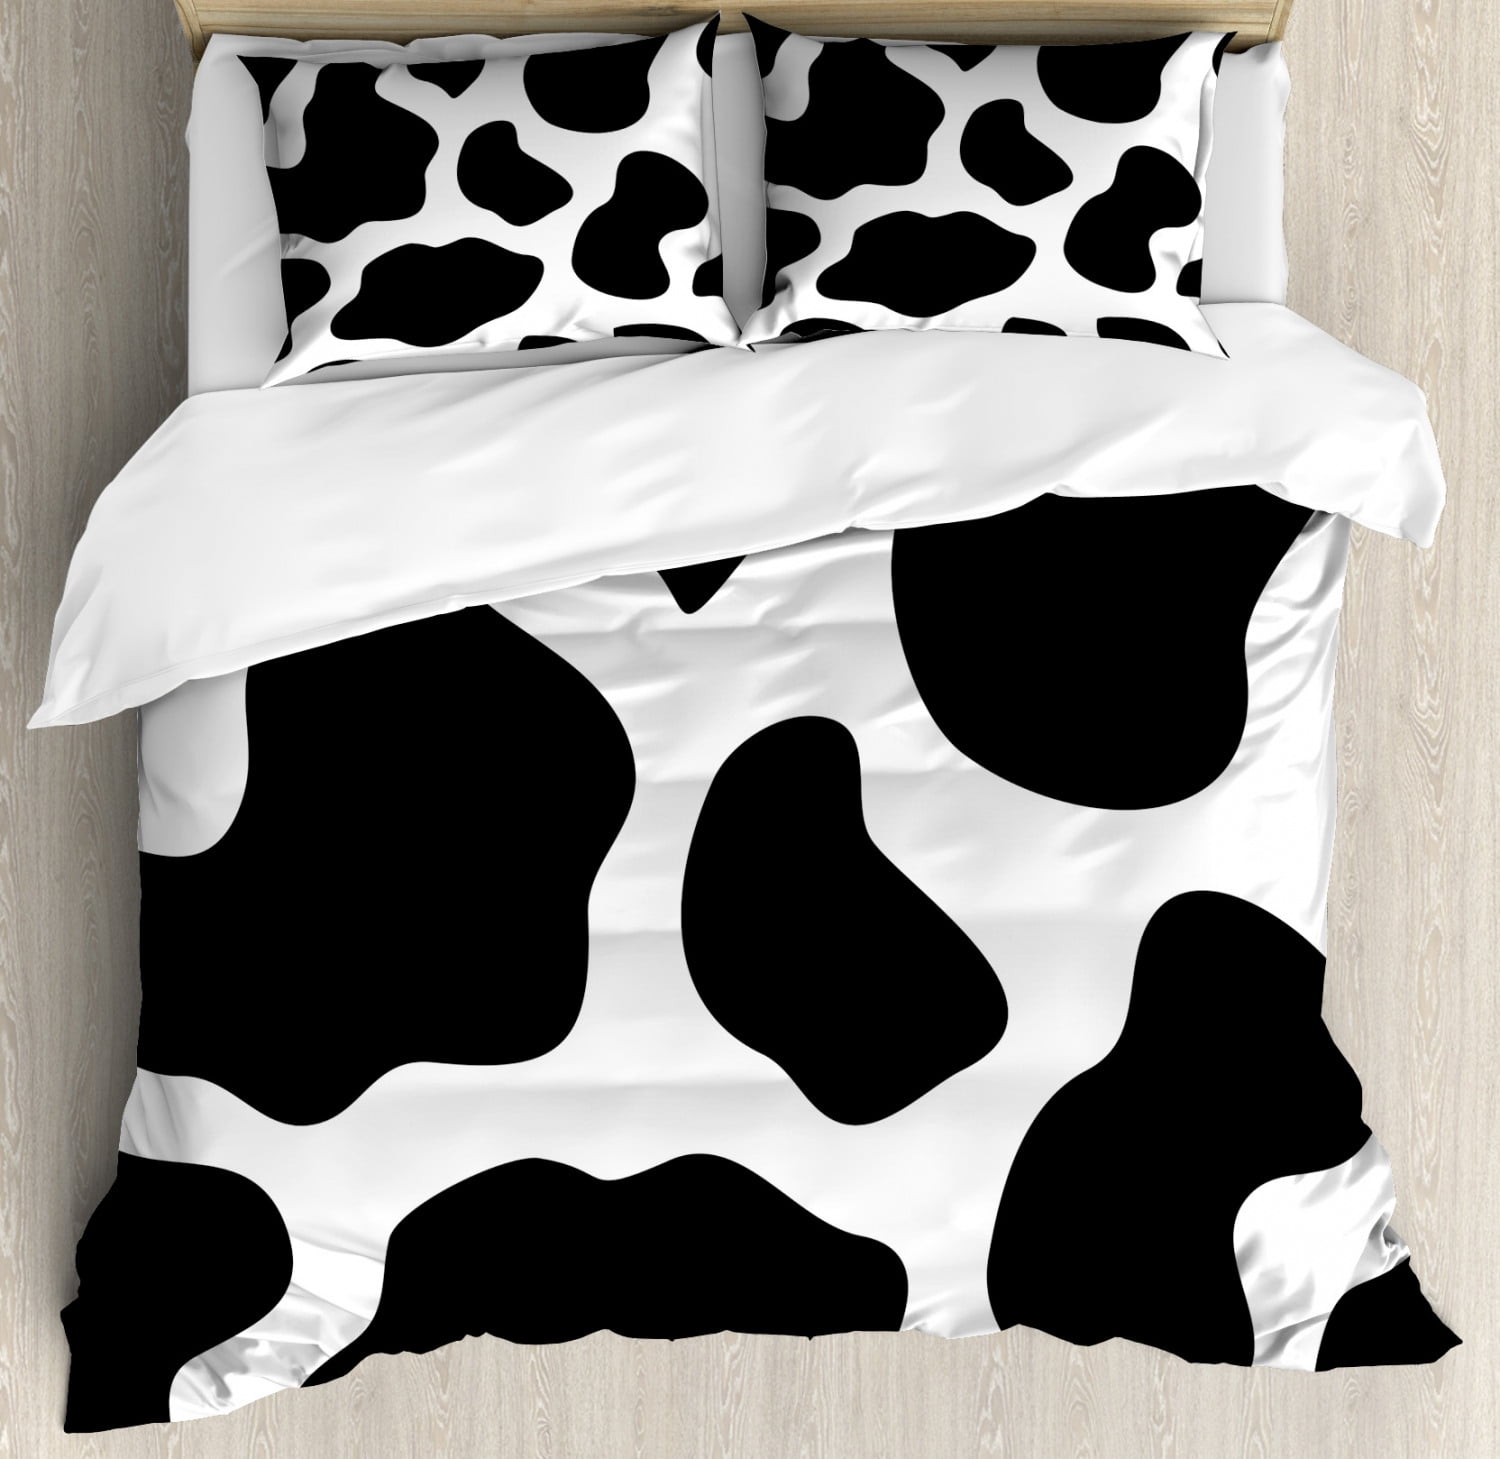 pillowcase Twin 9 pc Chocolate Rodeo Cow Print Comforter,Sheets Curtains 